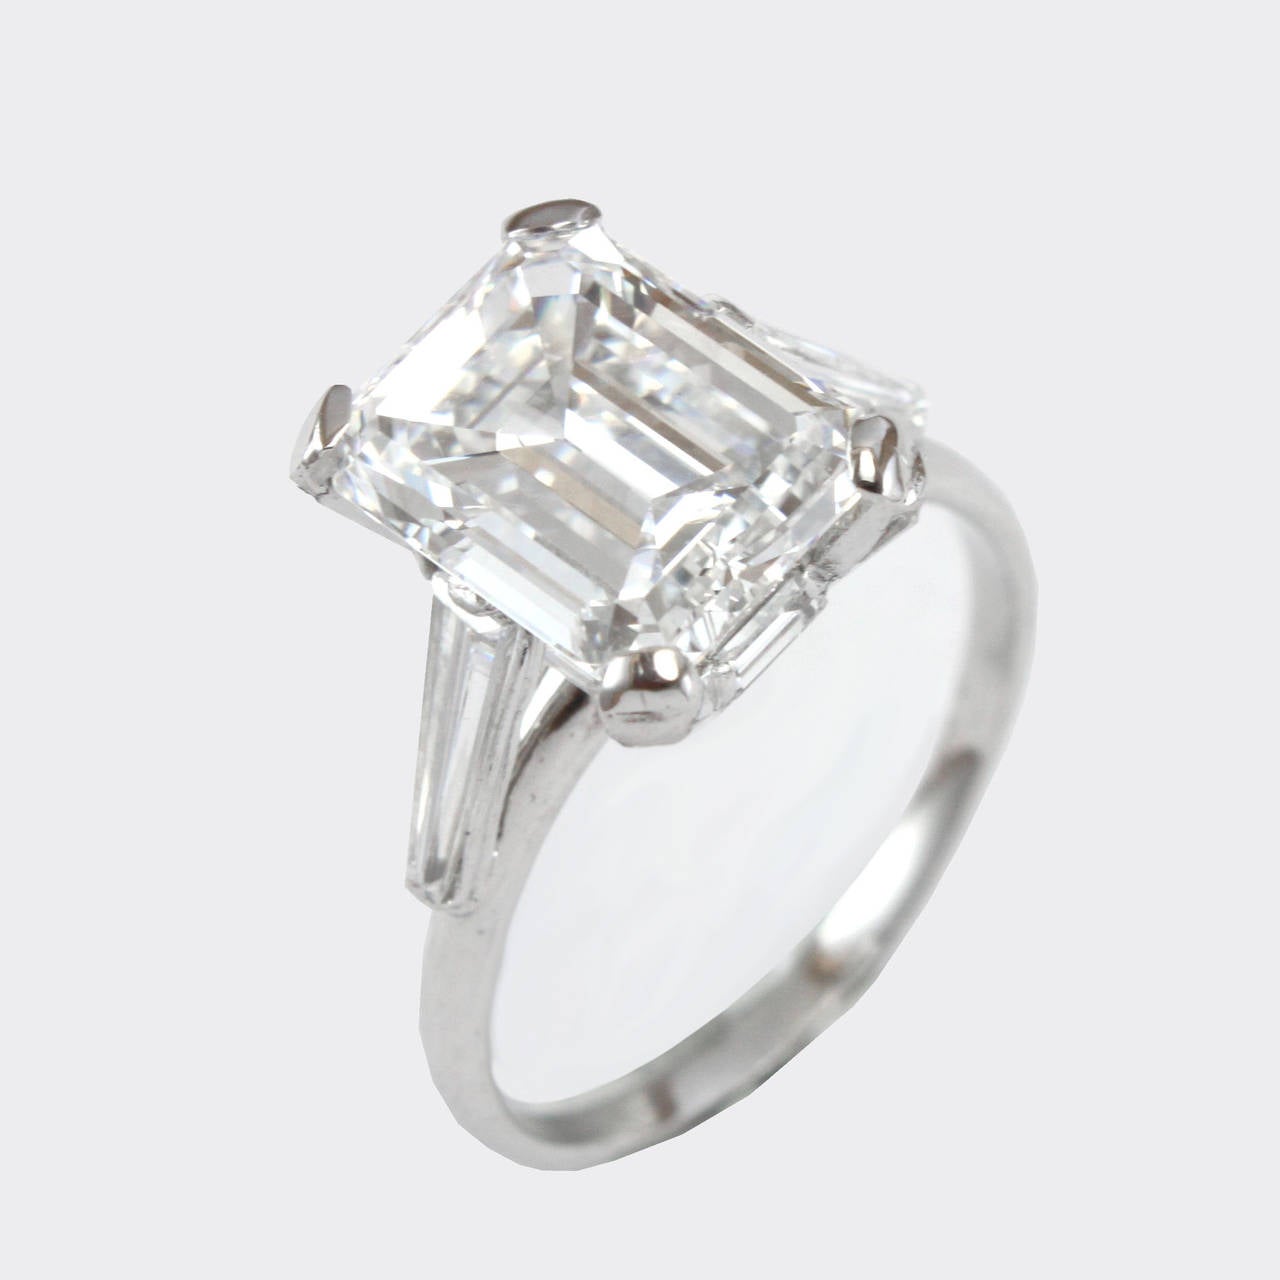 4.20 Carat E-VS1 Emerald Cut GIA Certified Solitaire and Baguette Diamond Ring 2